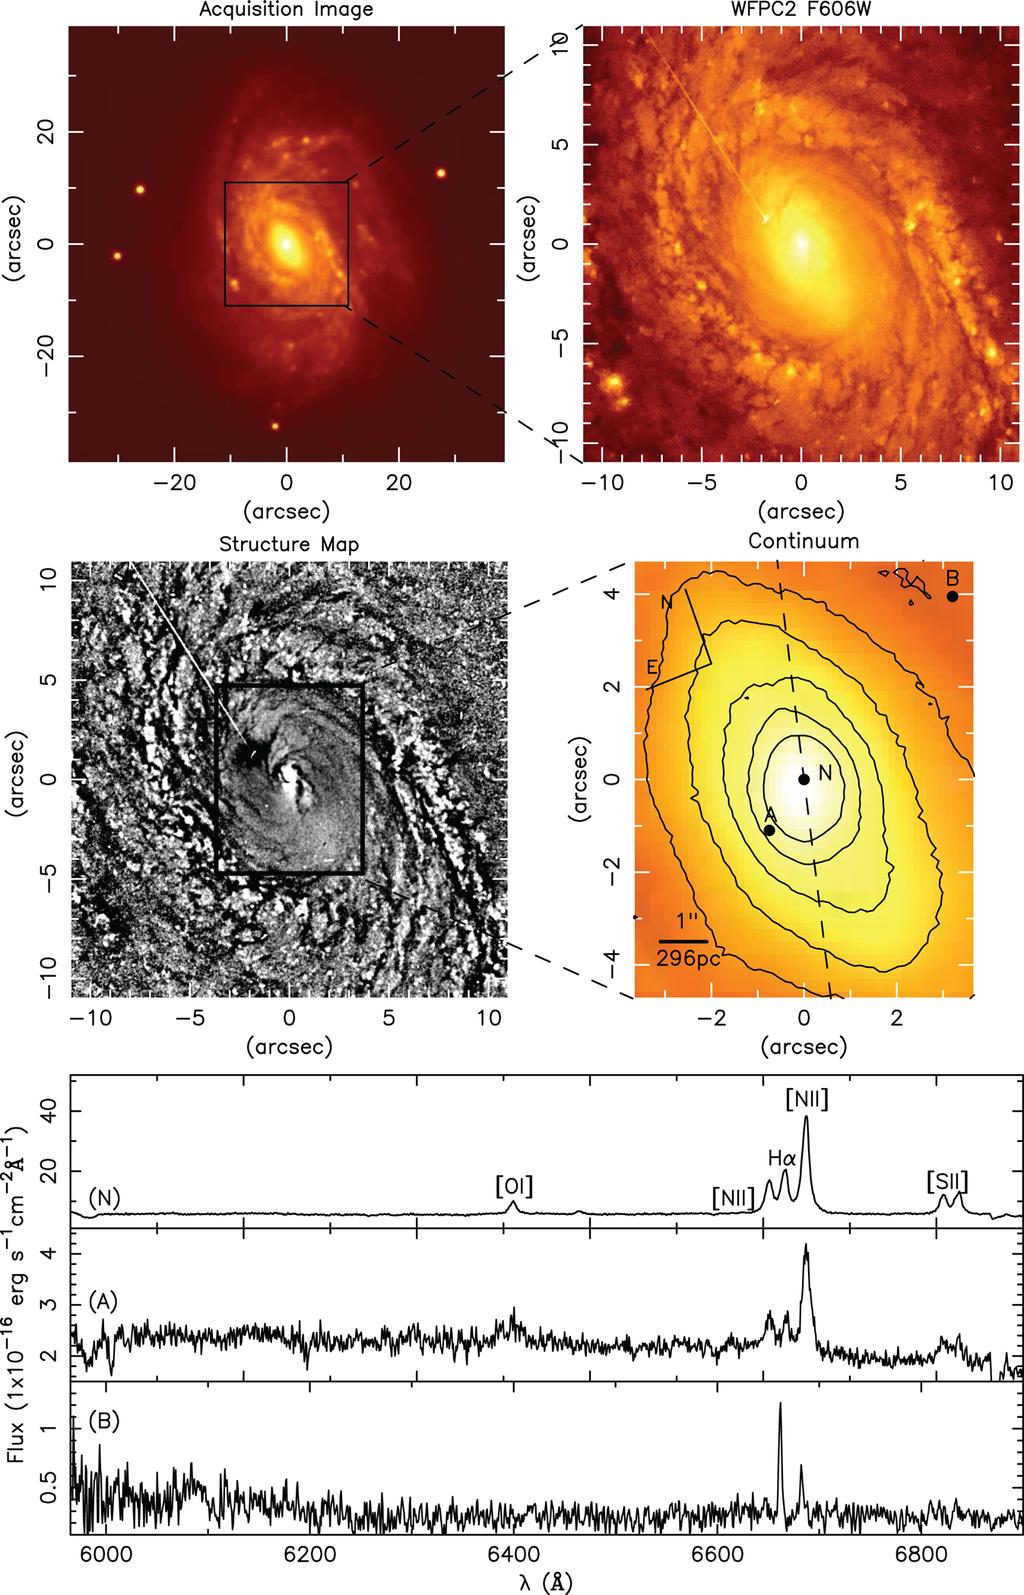 4372 A. Schnorr-Mu ller et al. Figure 1. Top left: acquisition image of NGC1667. Top right: WFPC2 image. Middle left: structure map. The rectangle shows the field of the IFU observation.